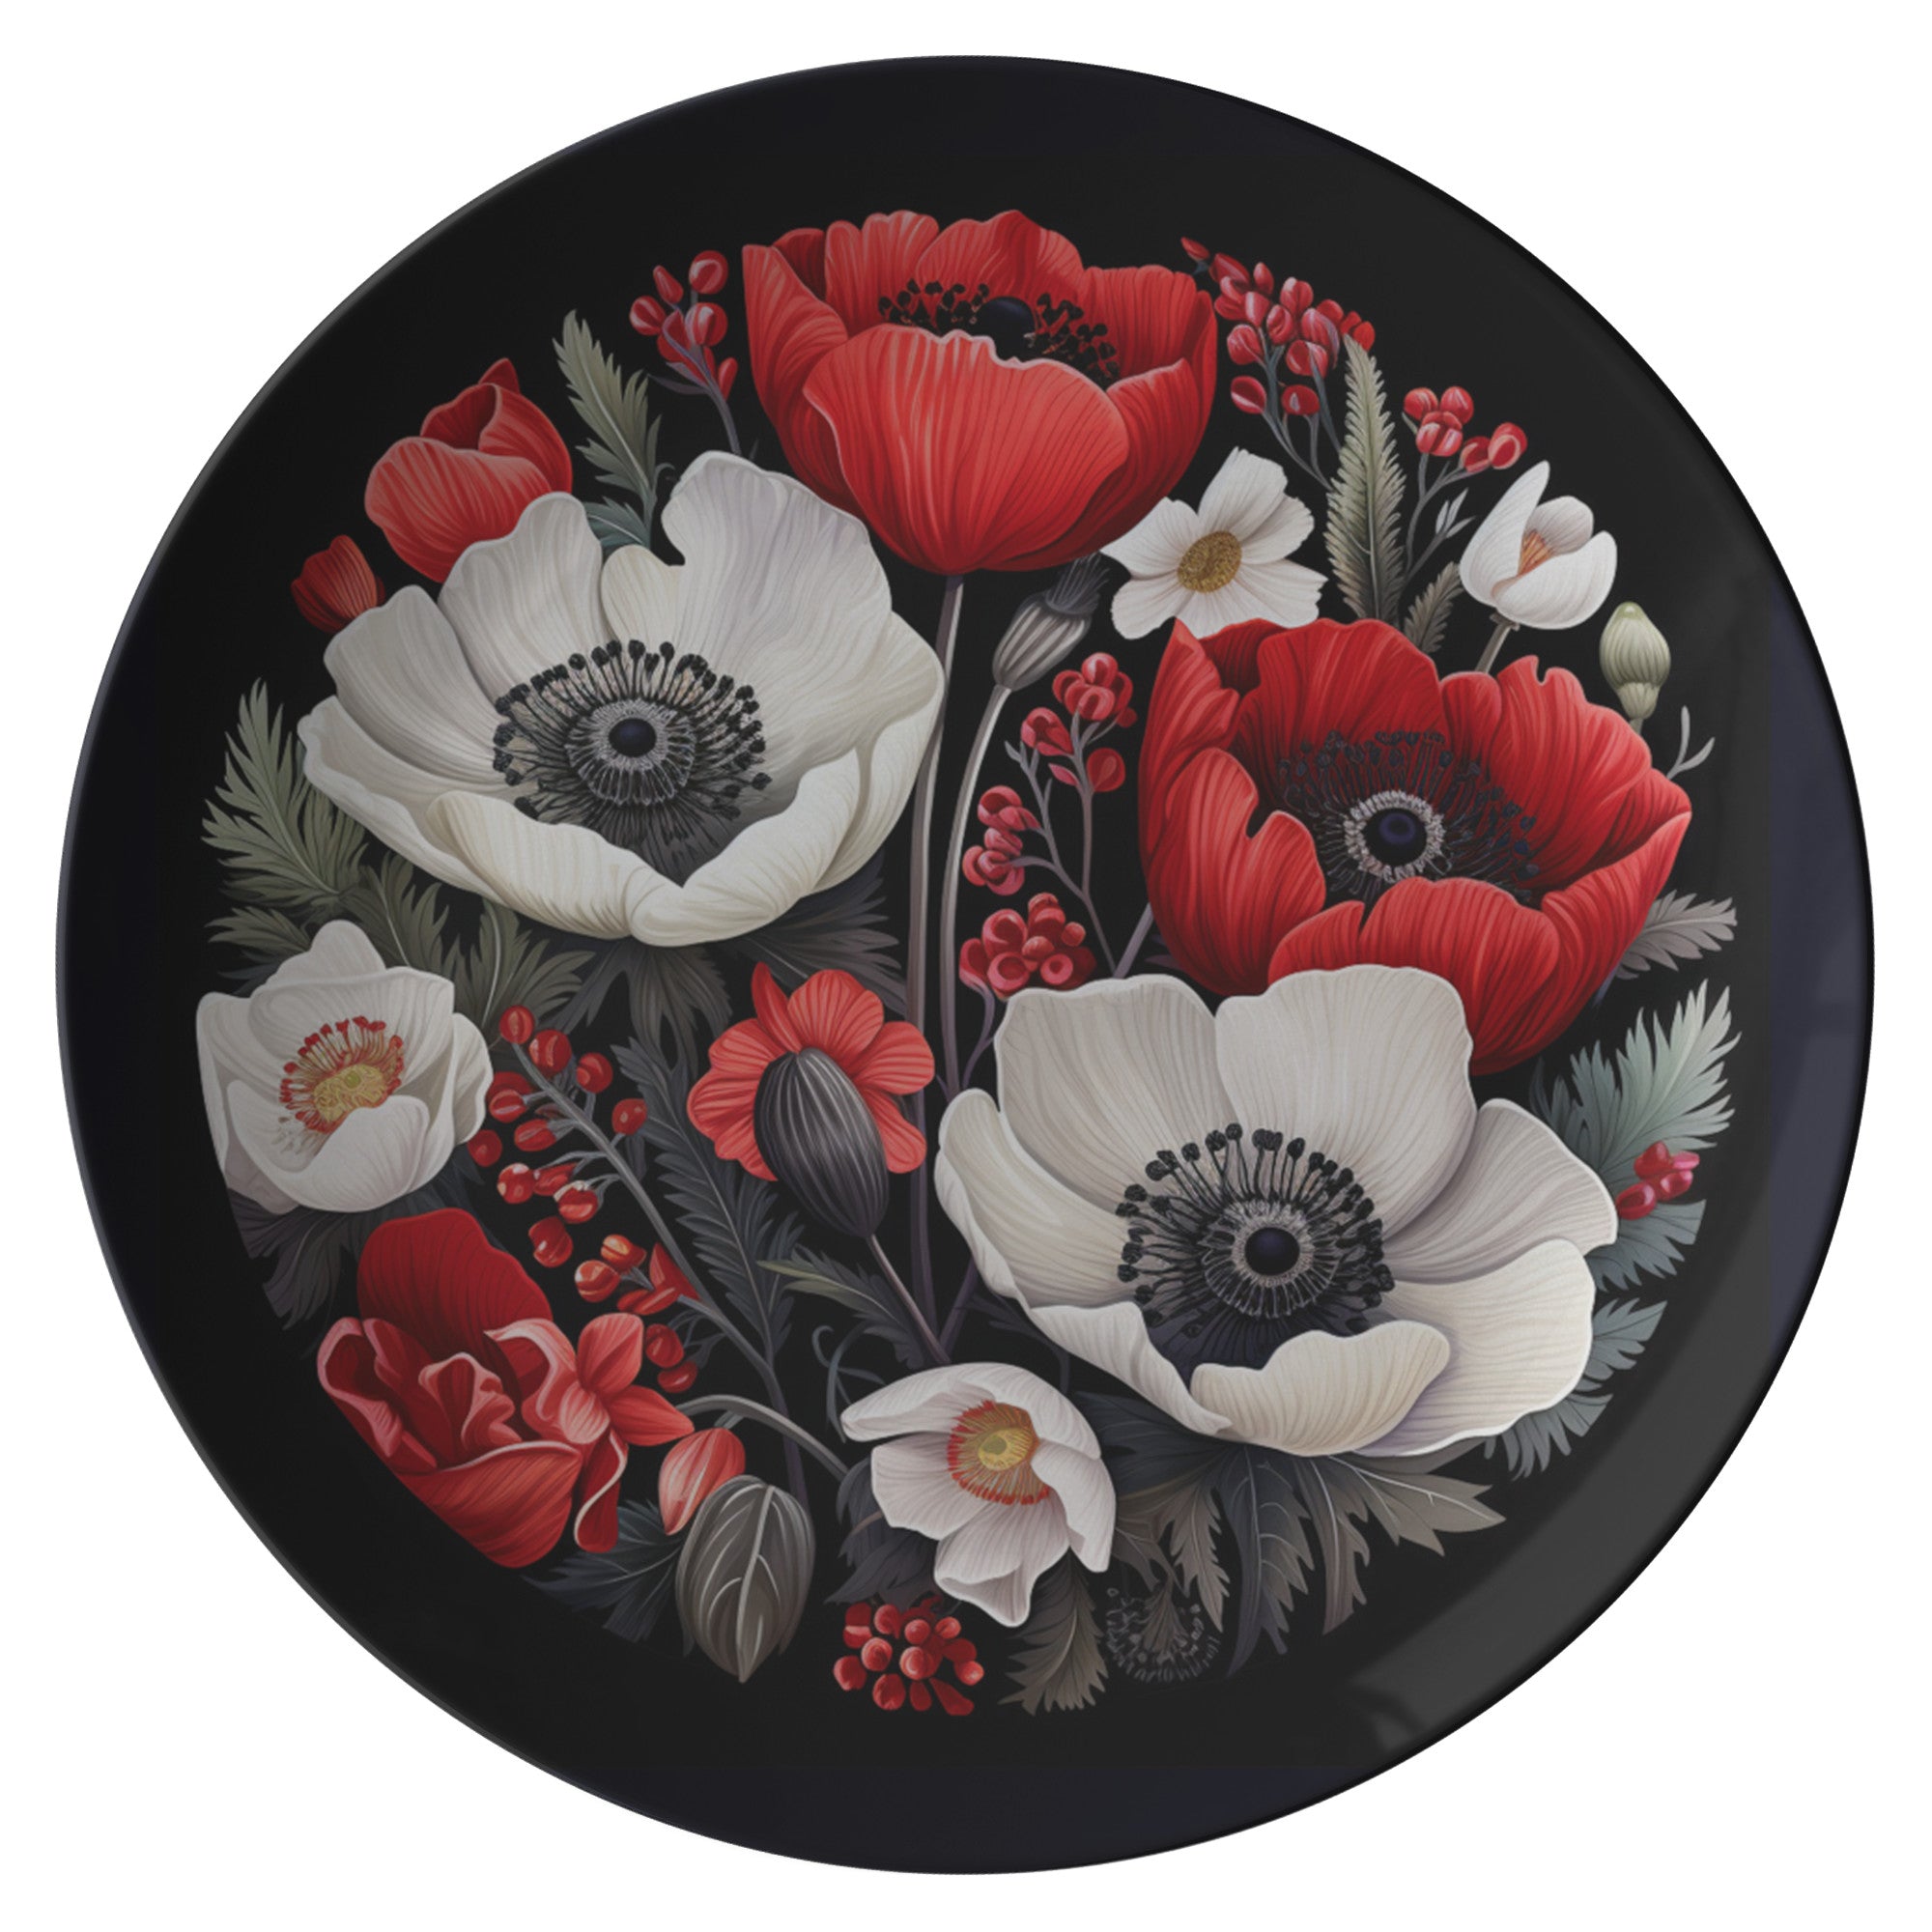 Poppies, Crocus Scepusiensis and Chicory Plate Kitchenware teelaunch   